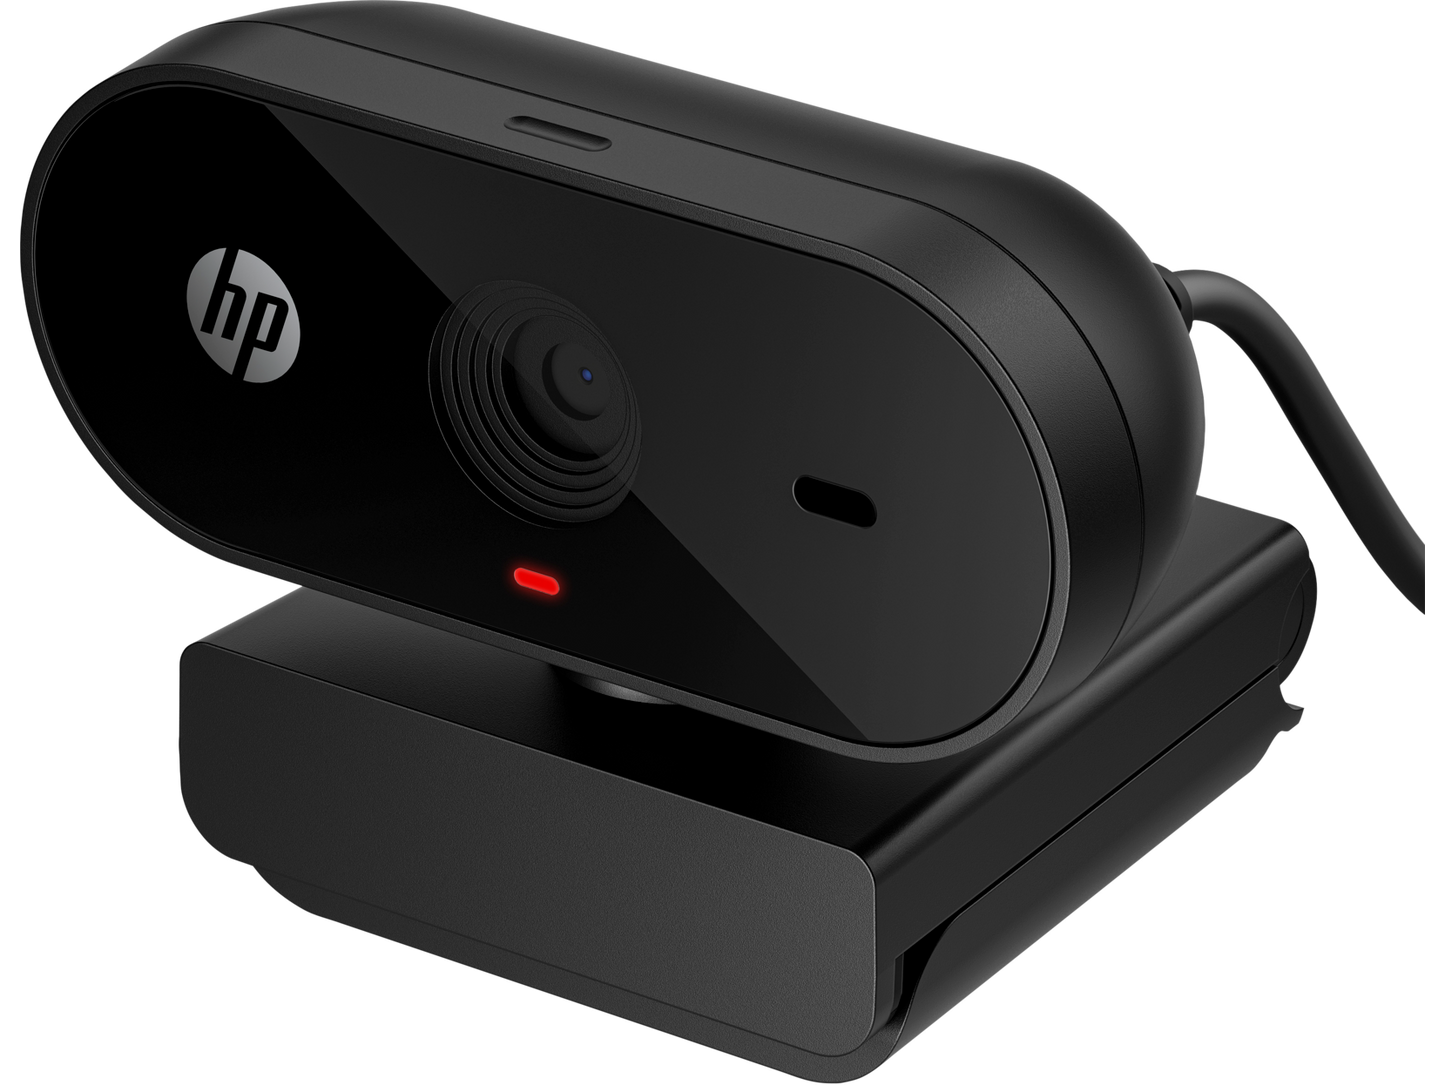 HP 325 1080p Full HD USB Computer Webcam with Mic & Privacy Cover